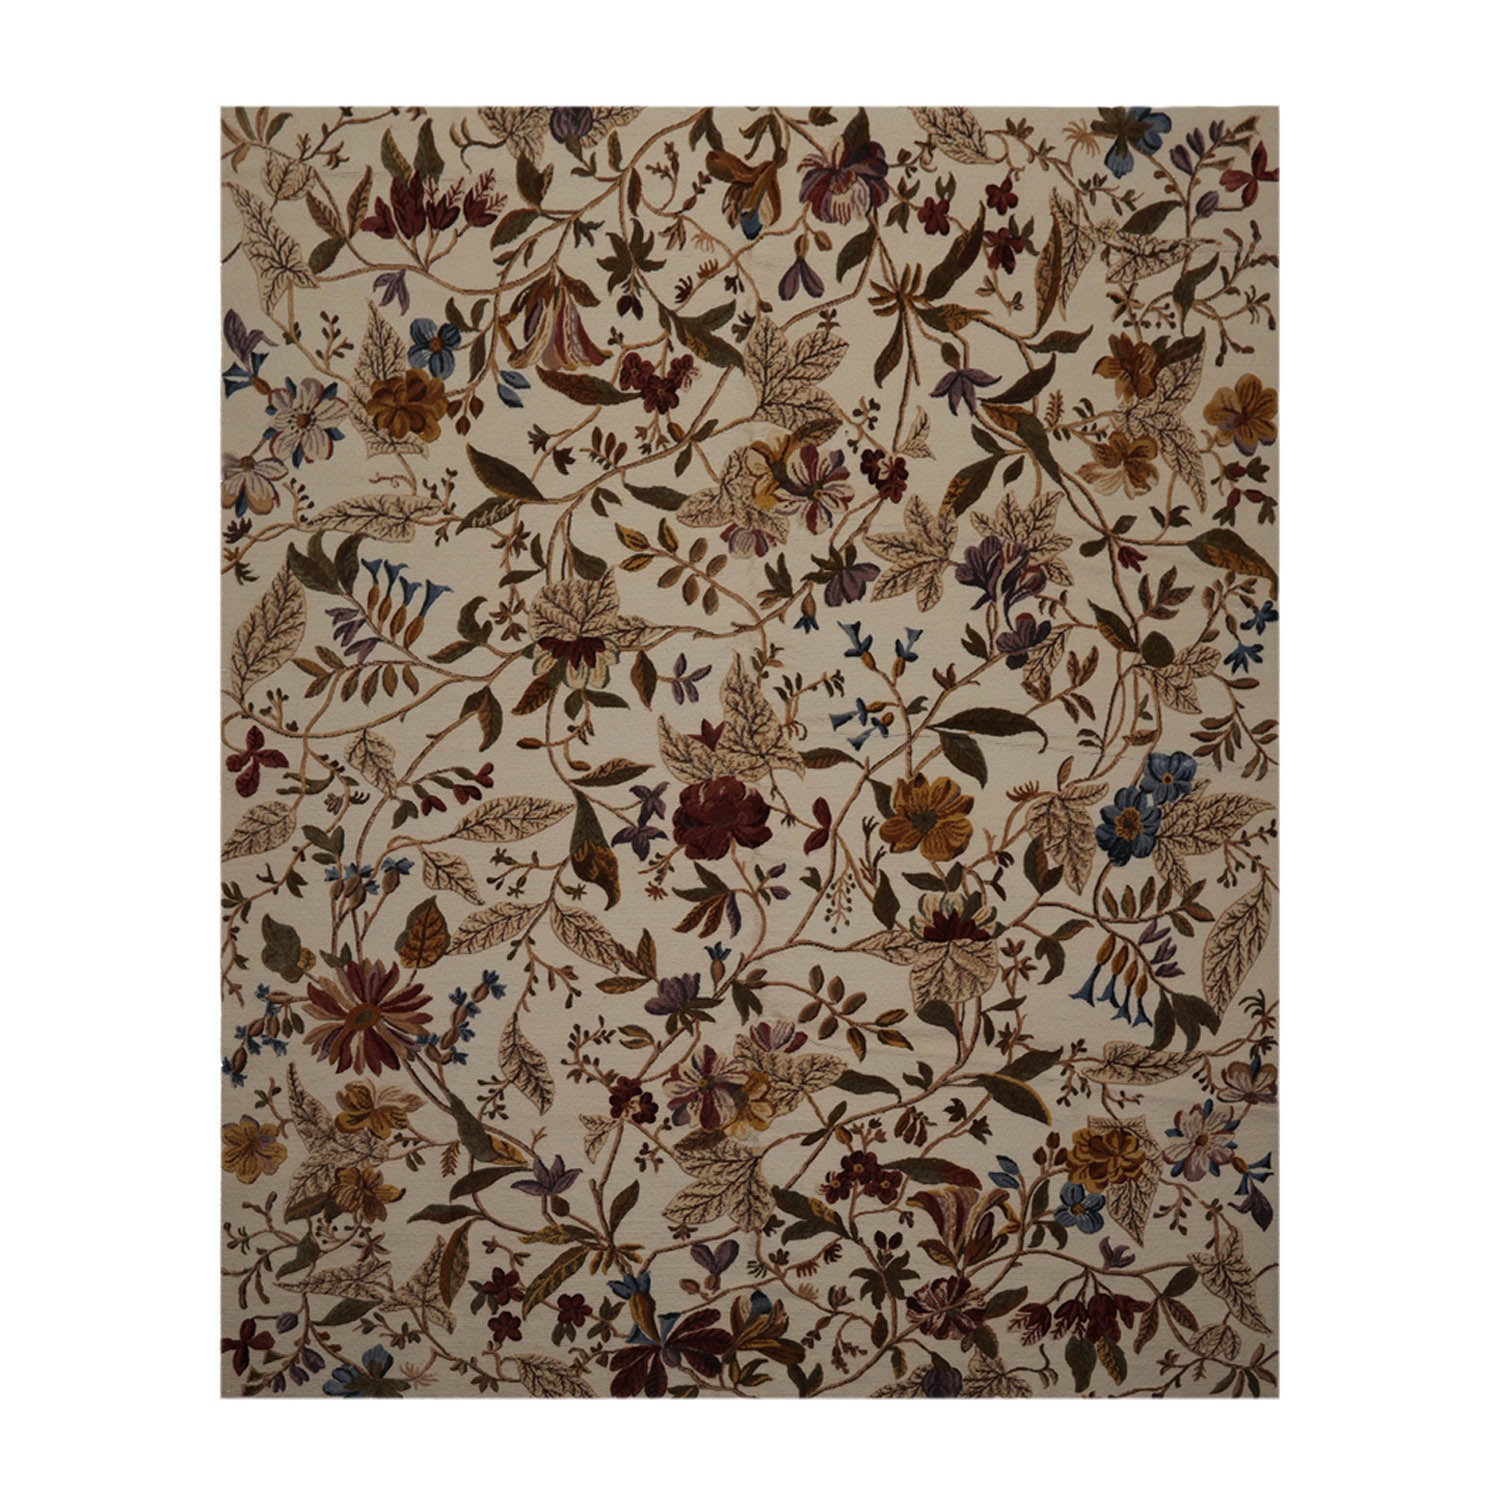 Jarome 8x10 Hand Knotted Tibetan 100% Wool Transitional-Botanical High Low Pile Oriental Area Rug Beige, Rust Color